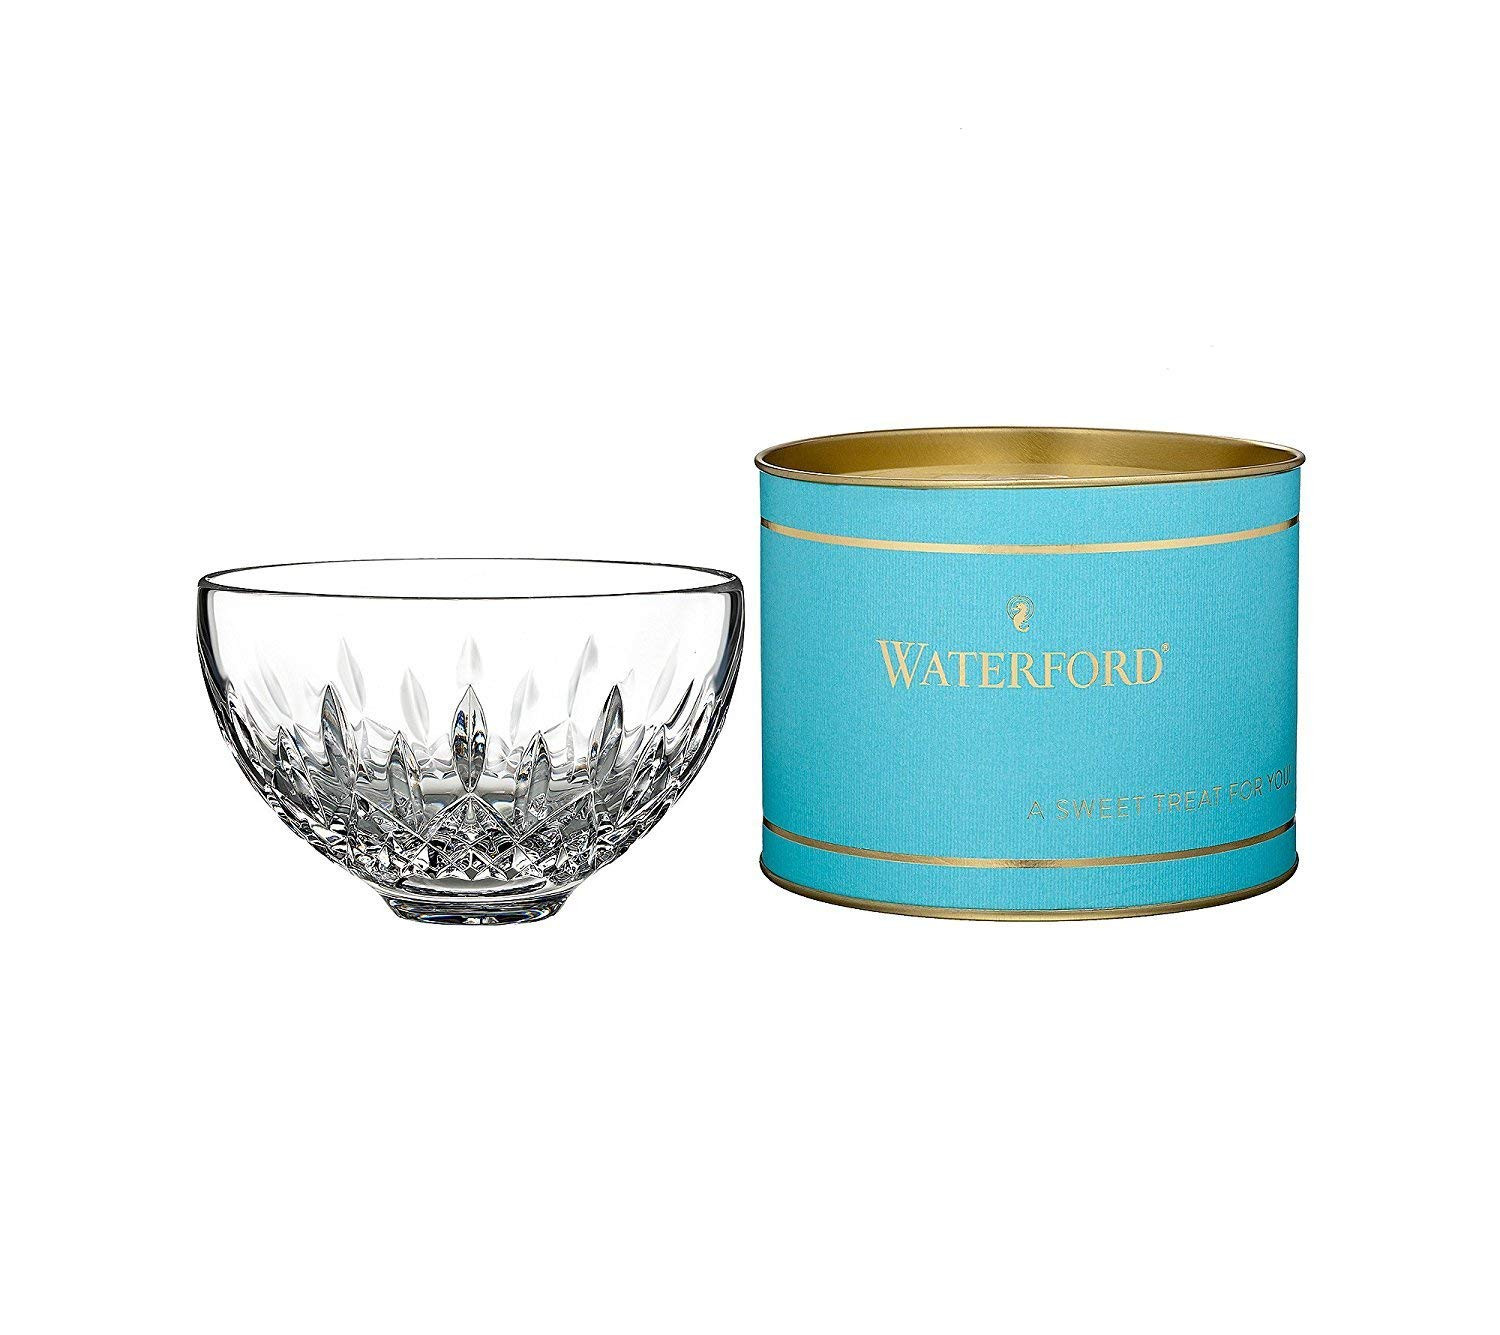 10 Fabulous Waterford Lismore Vase 8 2024 free download waterford lismore vase 8 of amazon com waterford giftology lismore 5 honey bowl home kitchen for 71a1pjccahl sl1500